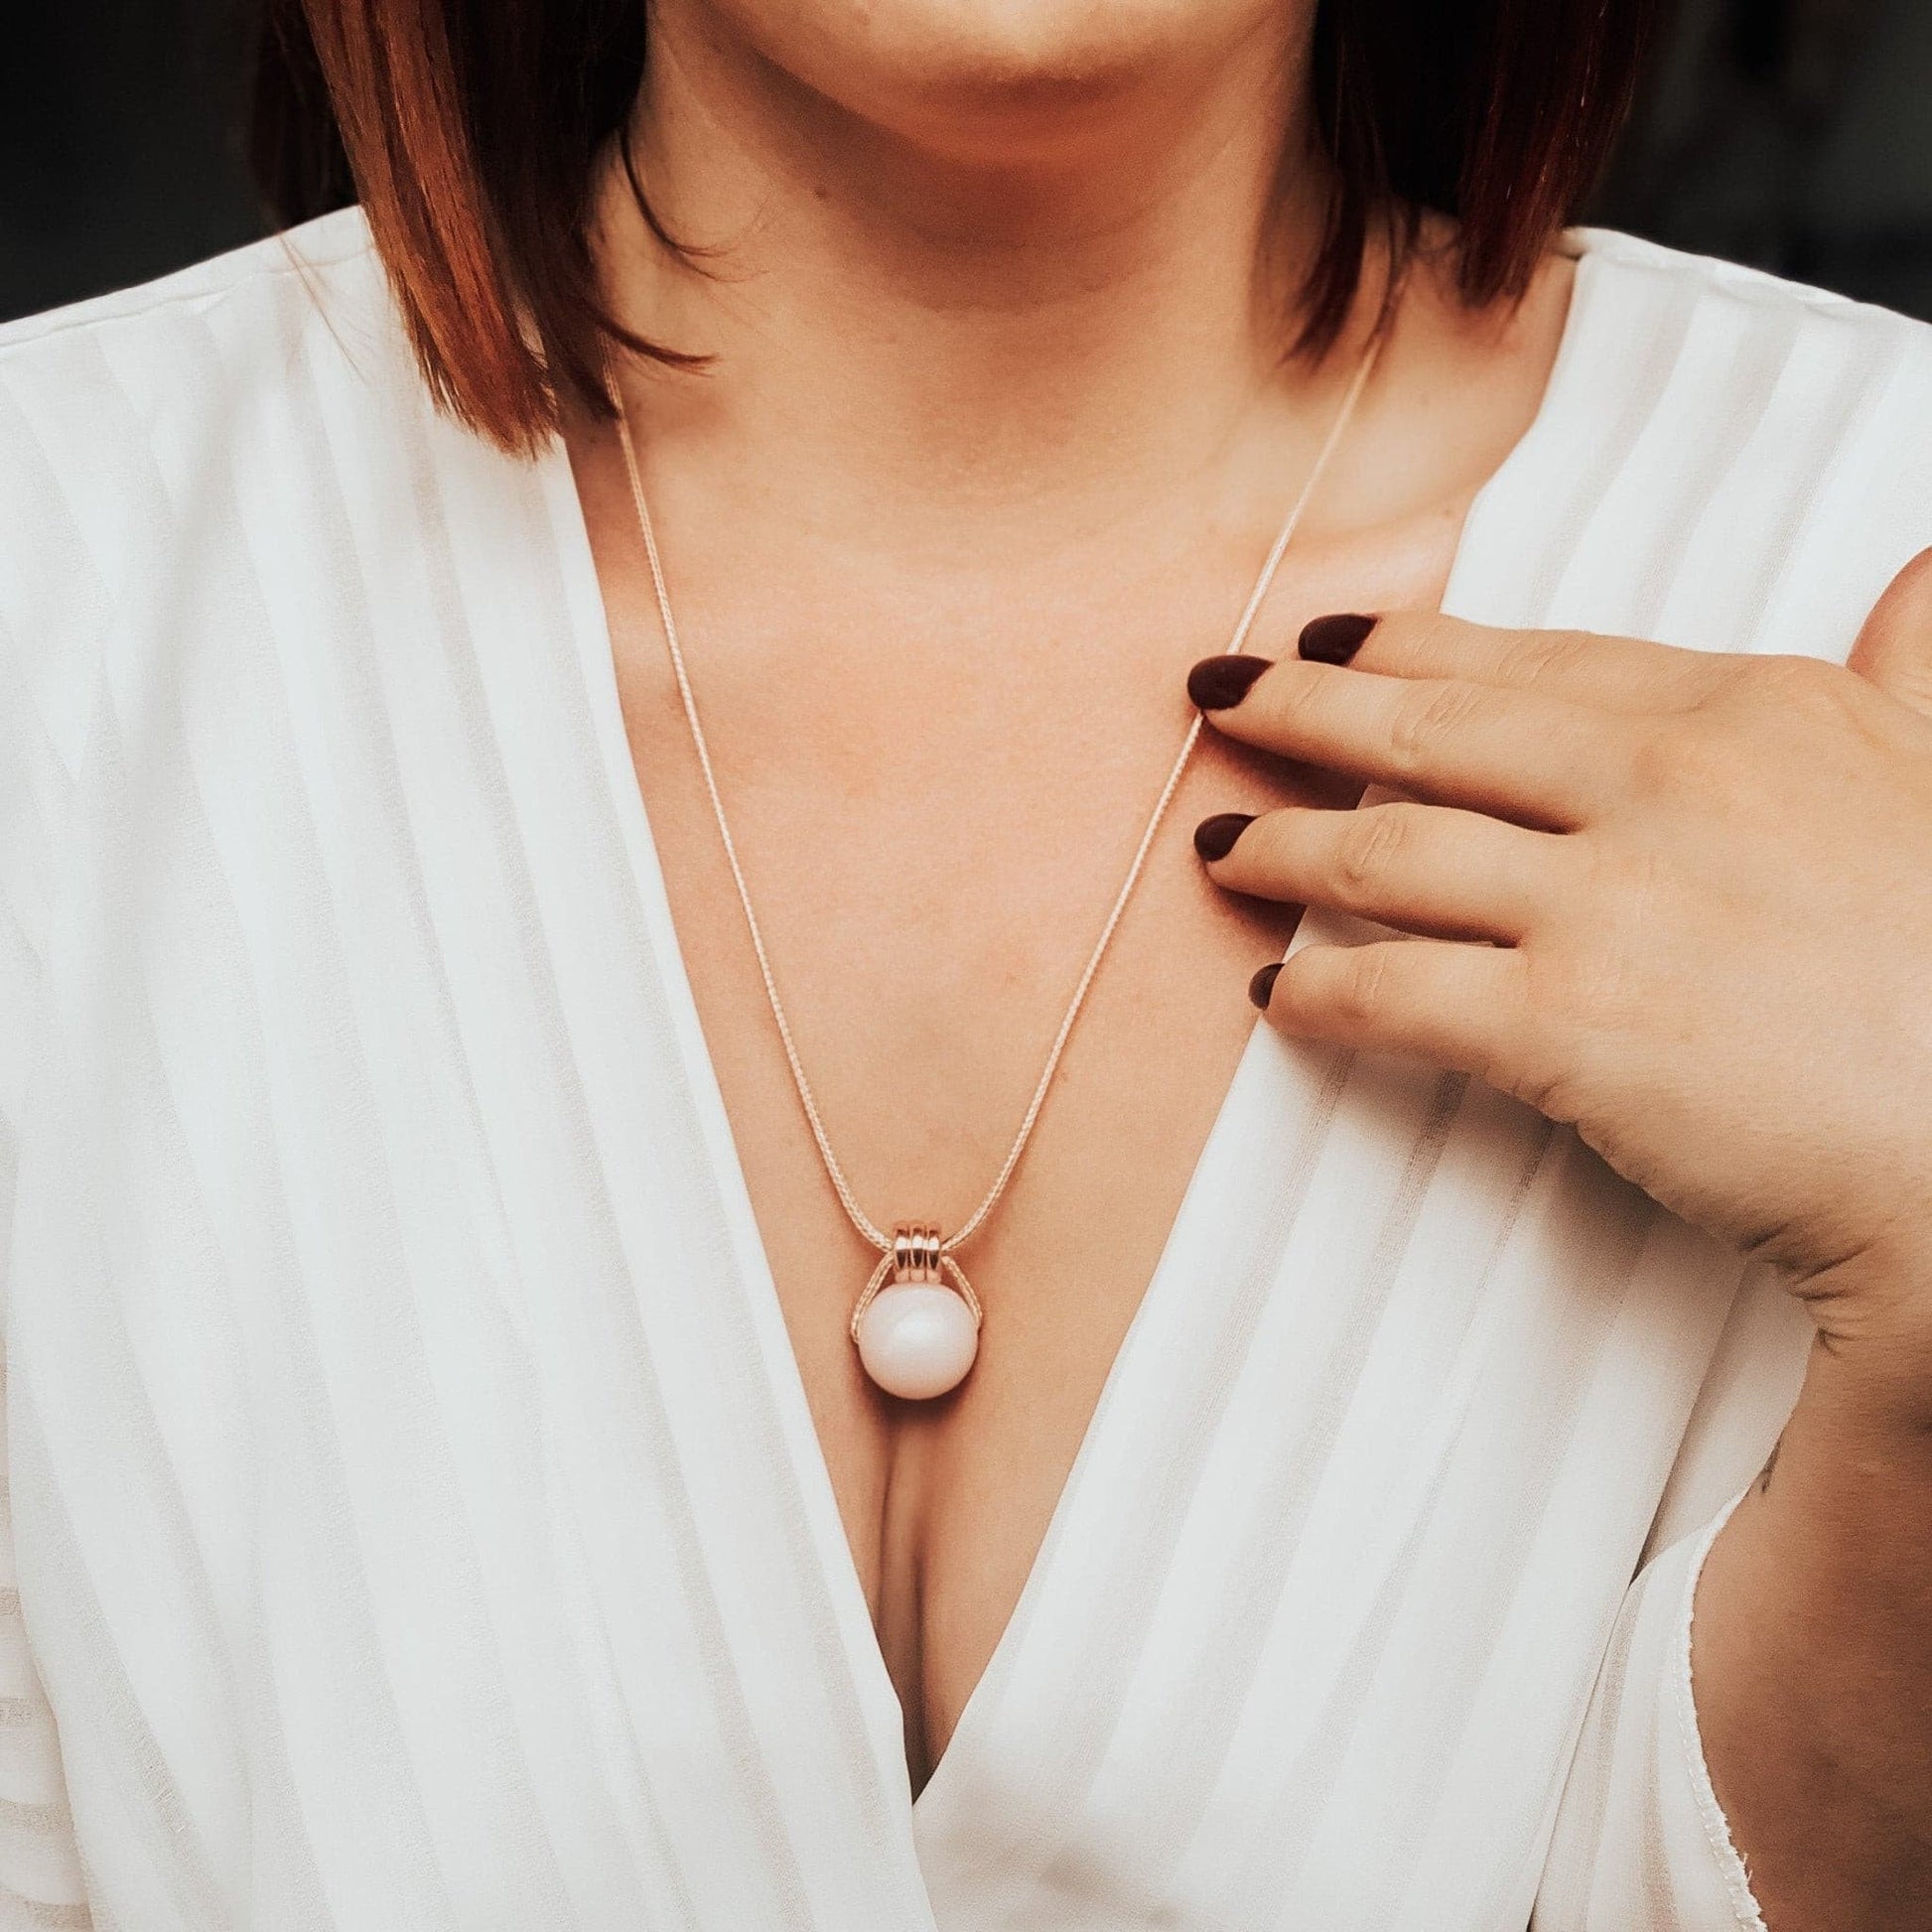 Rose pearl necklace worn by new mum by blossy.